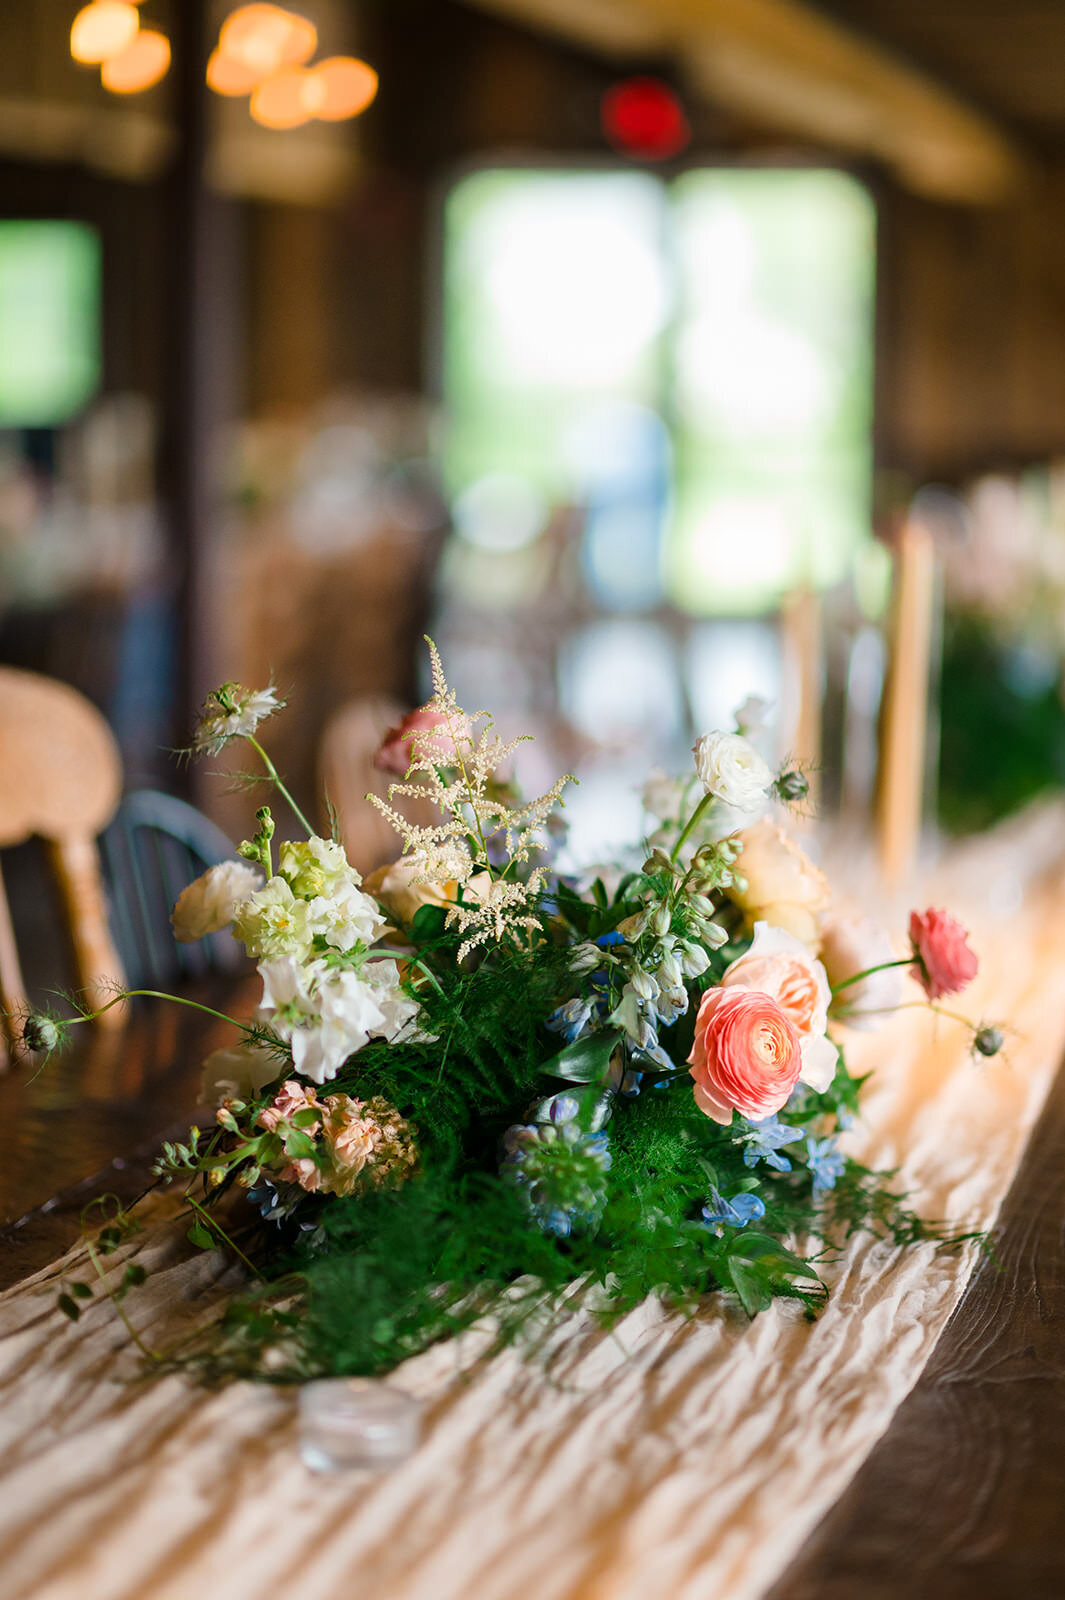 An elegant floral centerpiece with mixed blooms on a wooden table in a rustic setting.